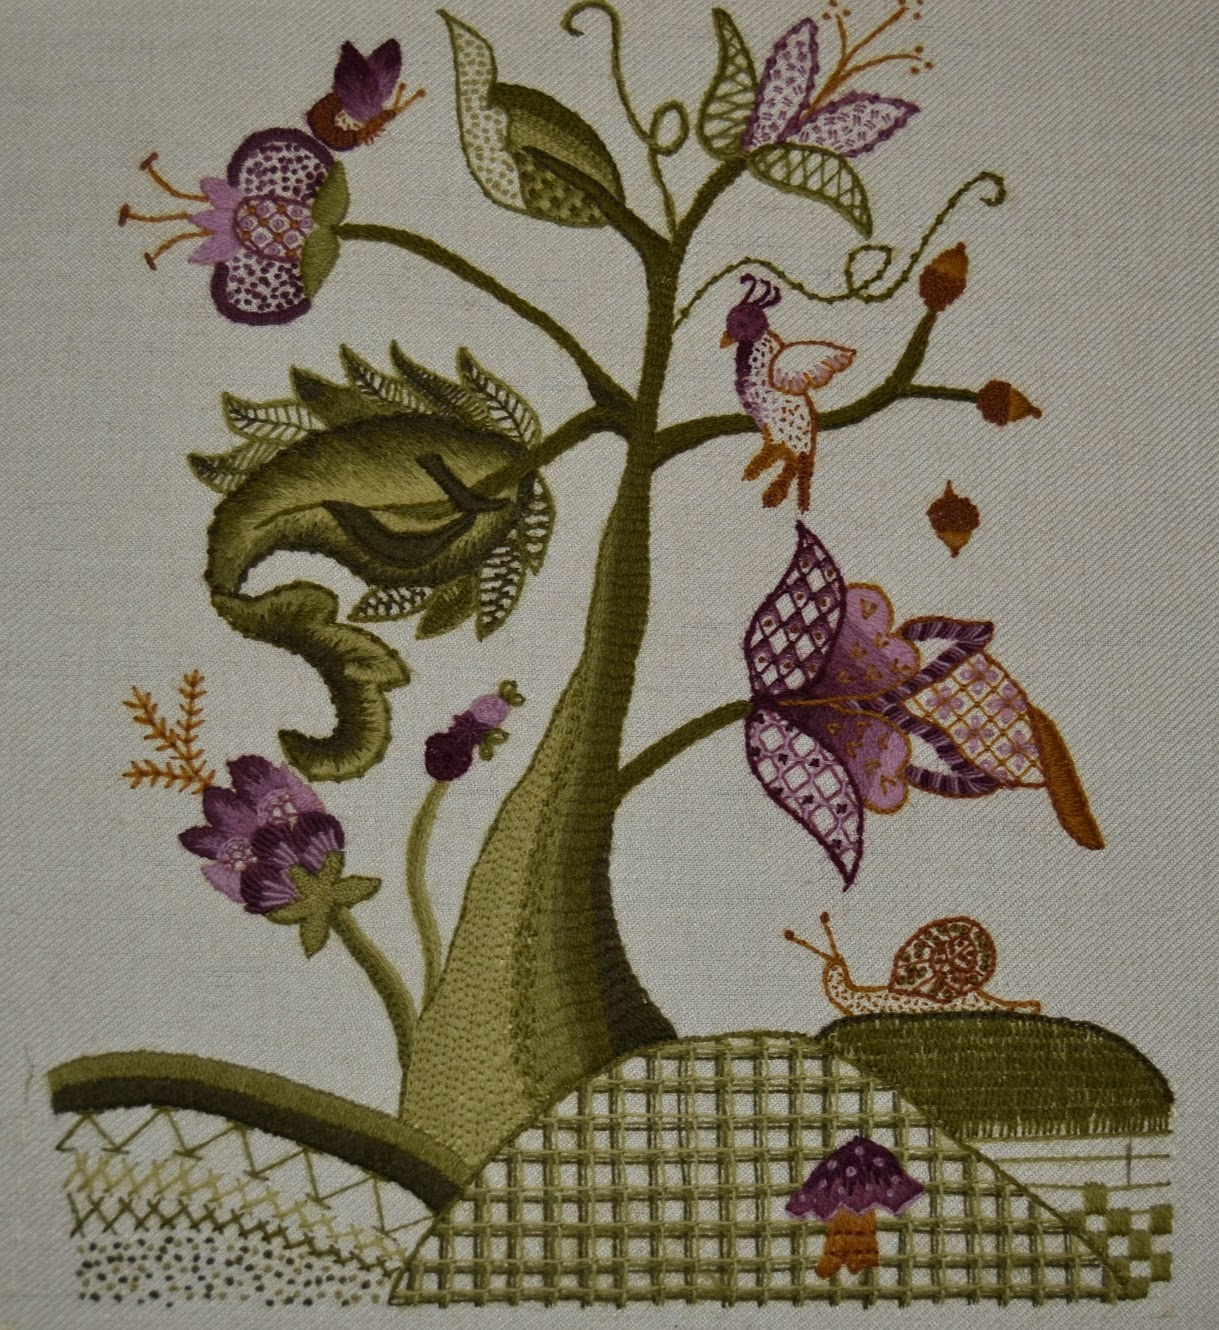 Jacobean Crewel Embroidery Patterns Renatas Arts And Crafts Crewel Embroidery Past And Present